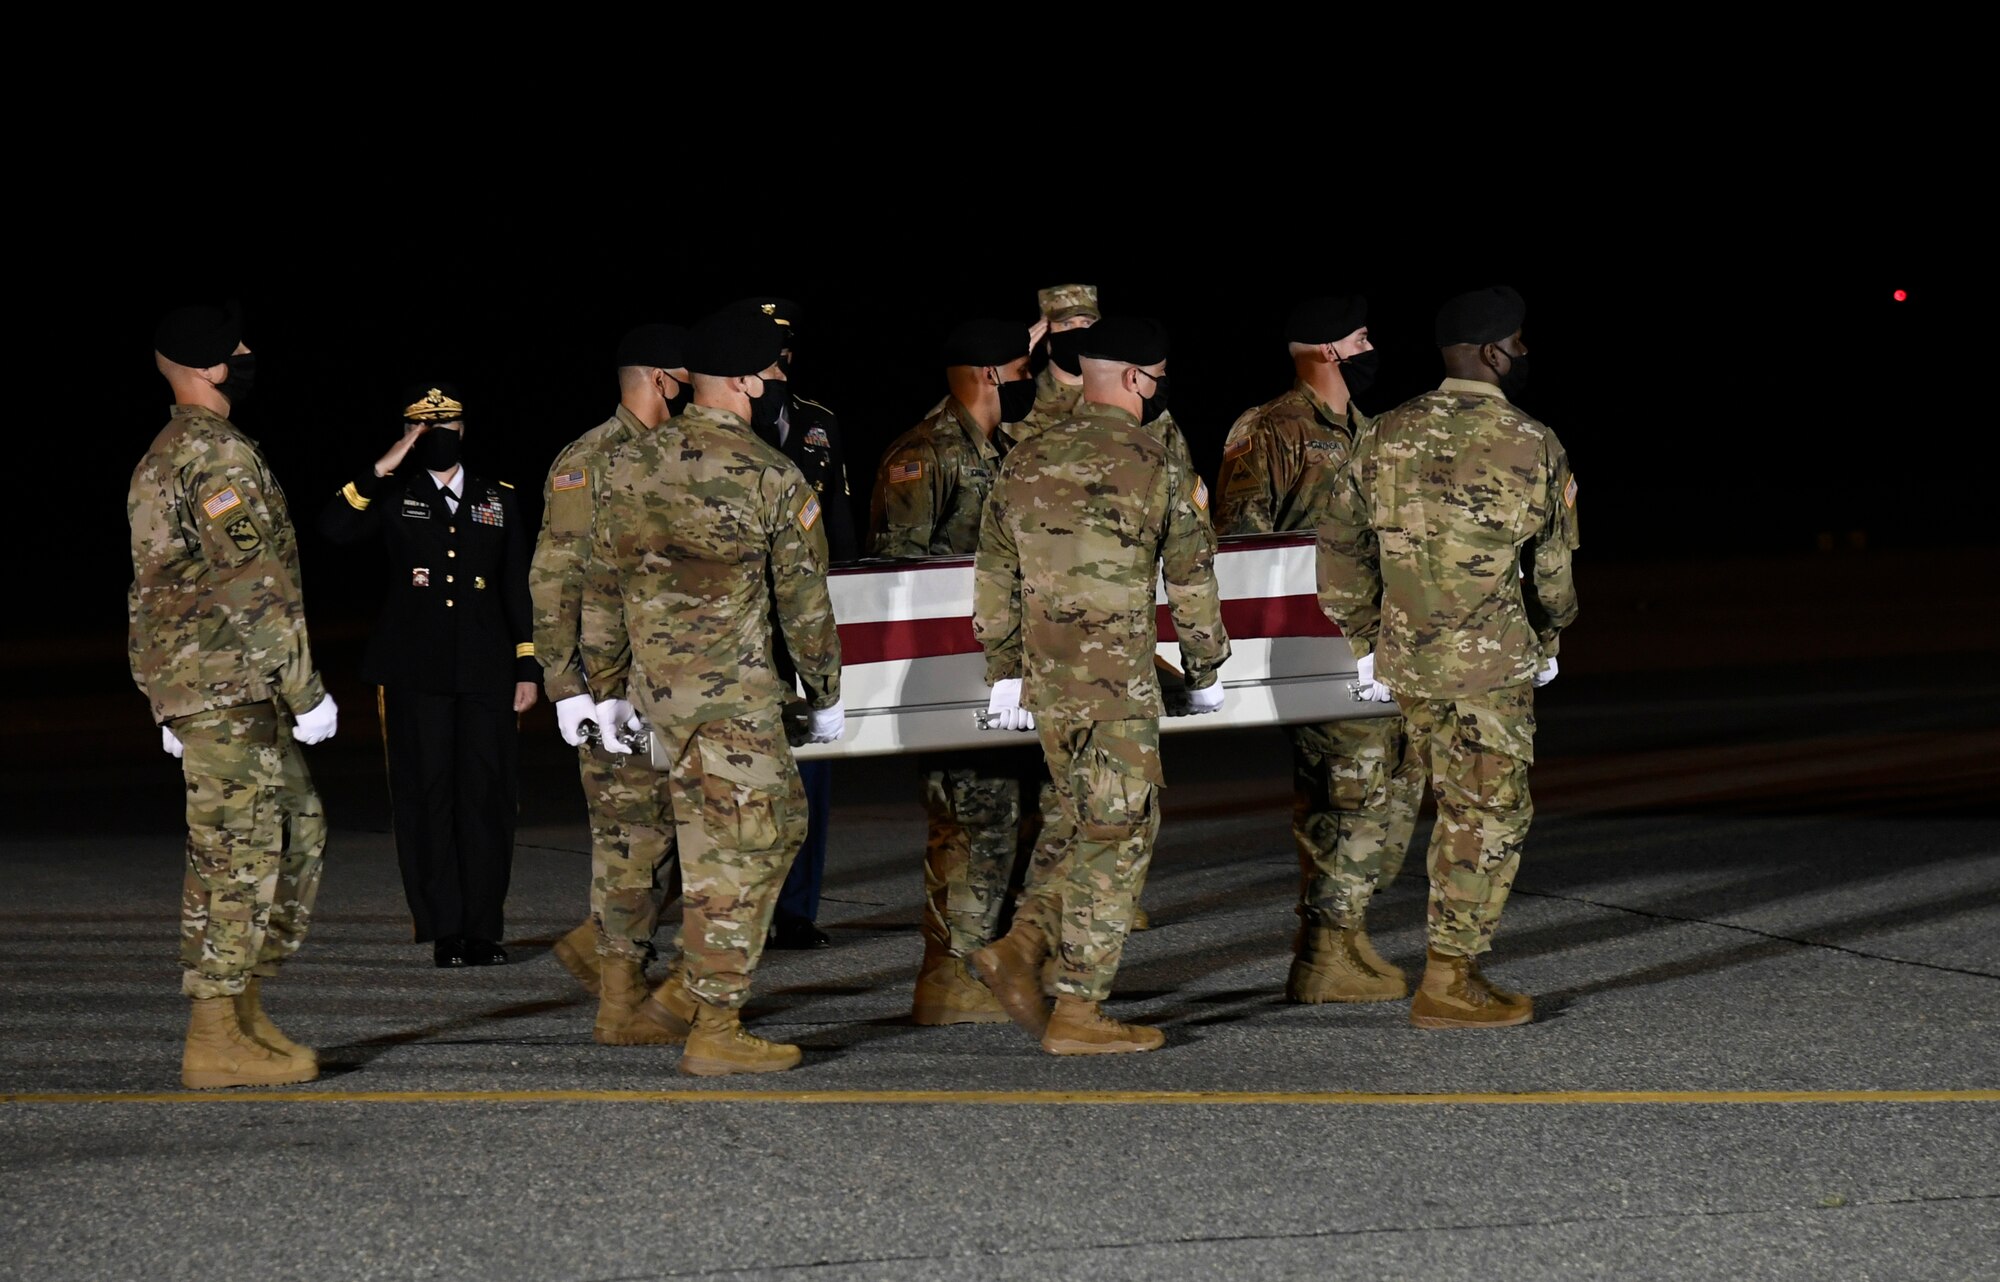 A U.S. Army carry team transfers the remains of Spc. Nick Bravo Regules of Largo, Florida, during a dignified transfer June 27, 2020, at Dover Air Force Base, Delaware. Bravo Regules was assigned to 2nd Battalion, 43rd Air Defense Artillery Regiment, 11th Air Defense Artillery Brigade, Fort Bliss, Texas. (U.S. Air Force photo by Senior Airman Eric M. Fisher)